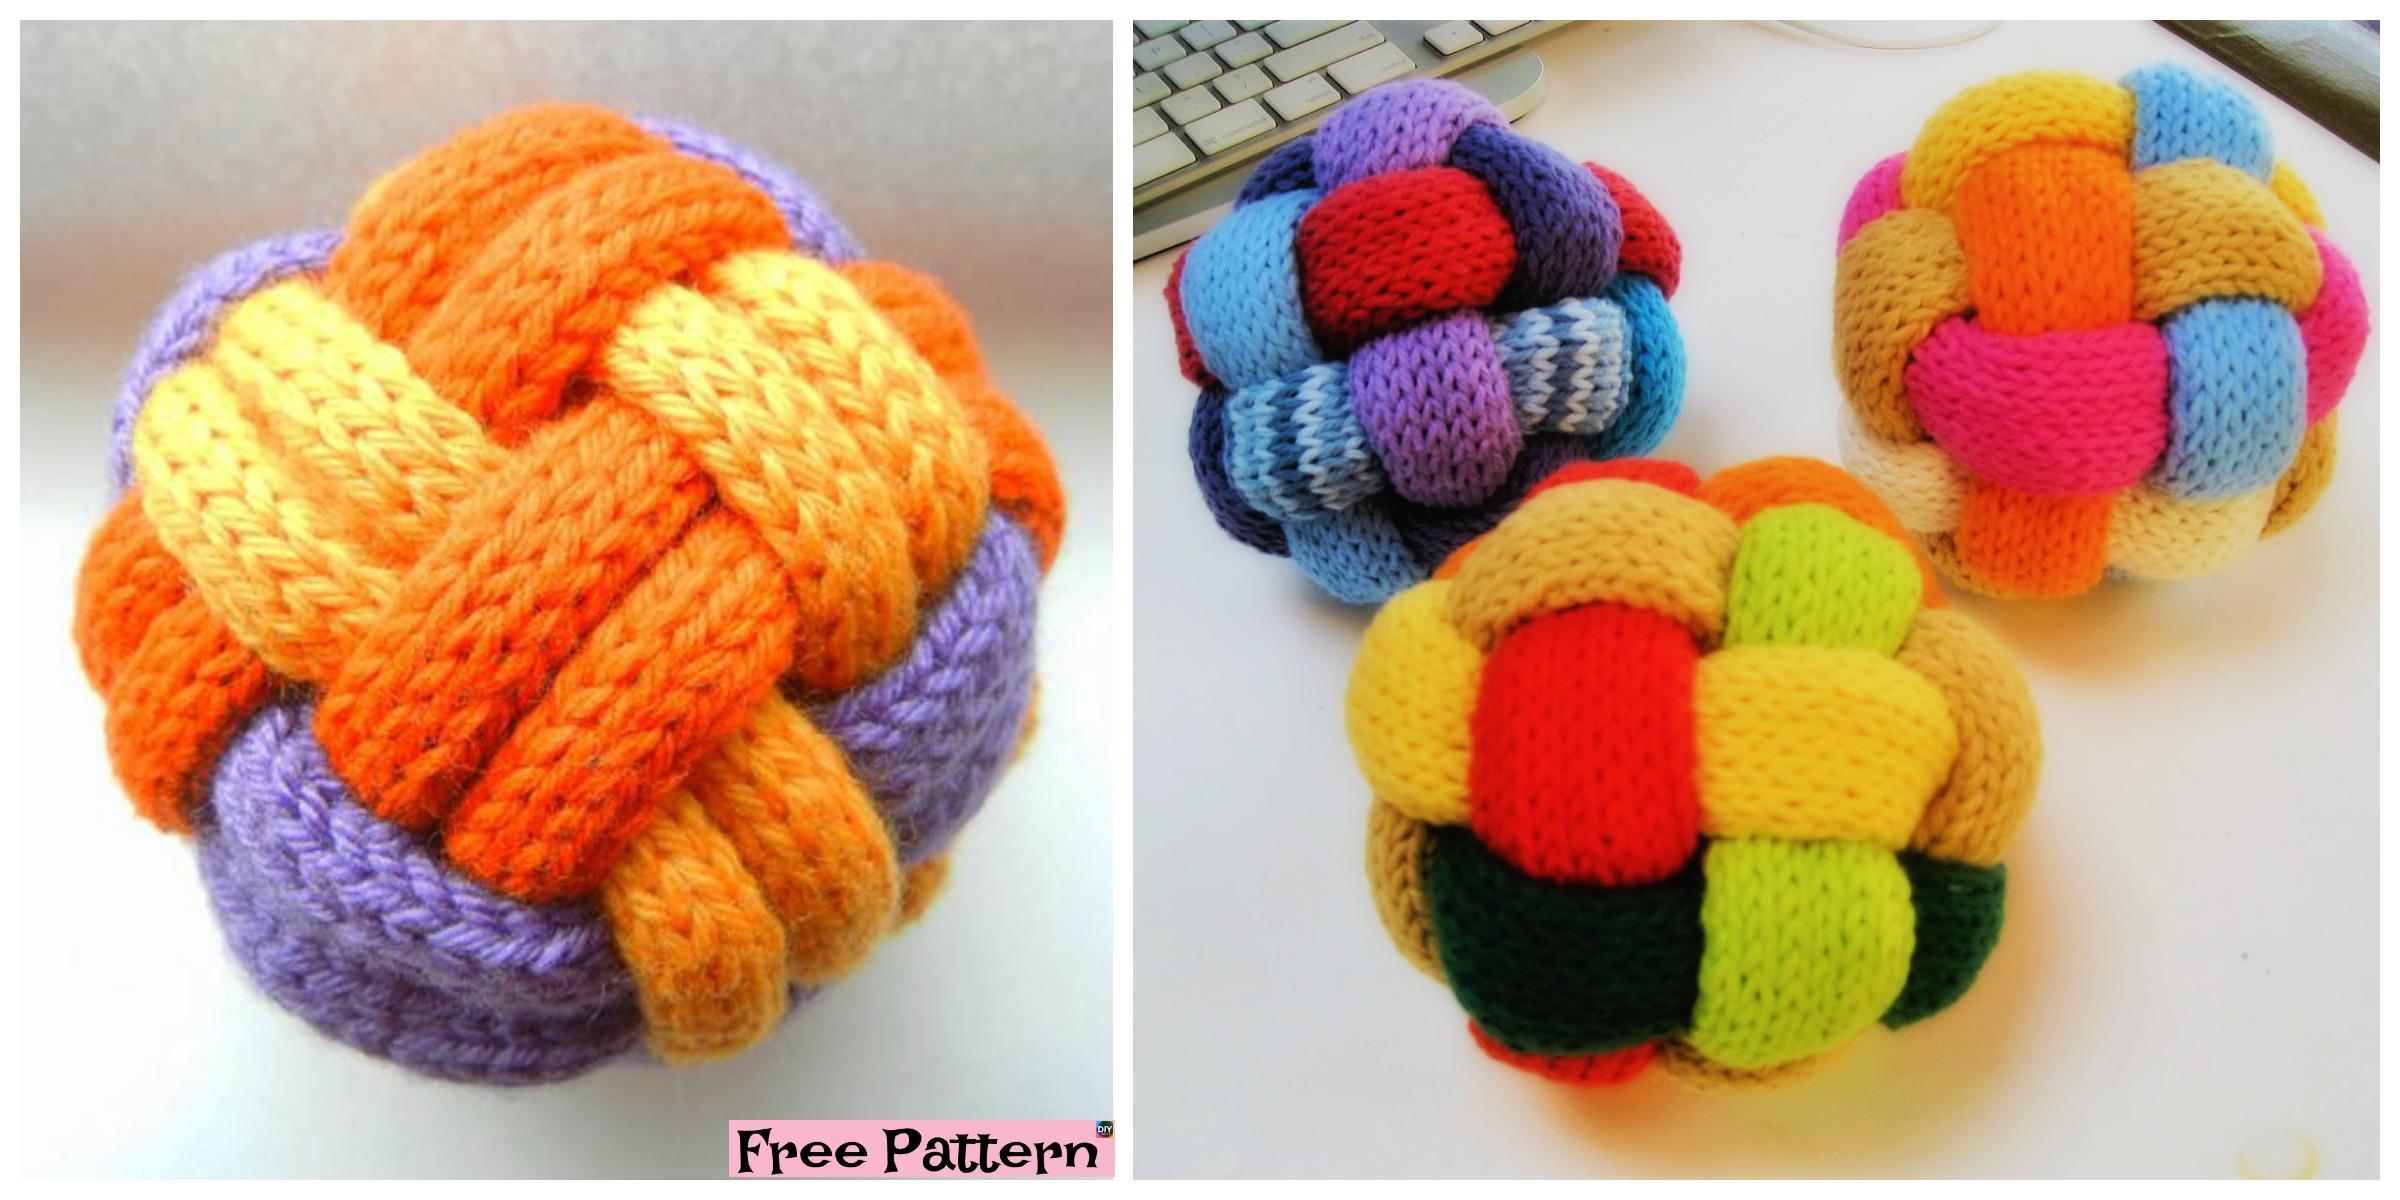 Knitted Ball Pattern Free Decorative Knitted Braided Ball Free Pattern Diy 4 Ever